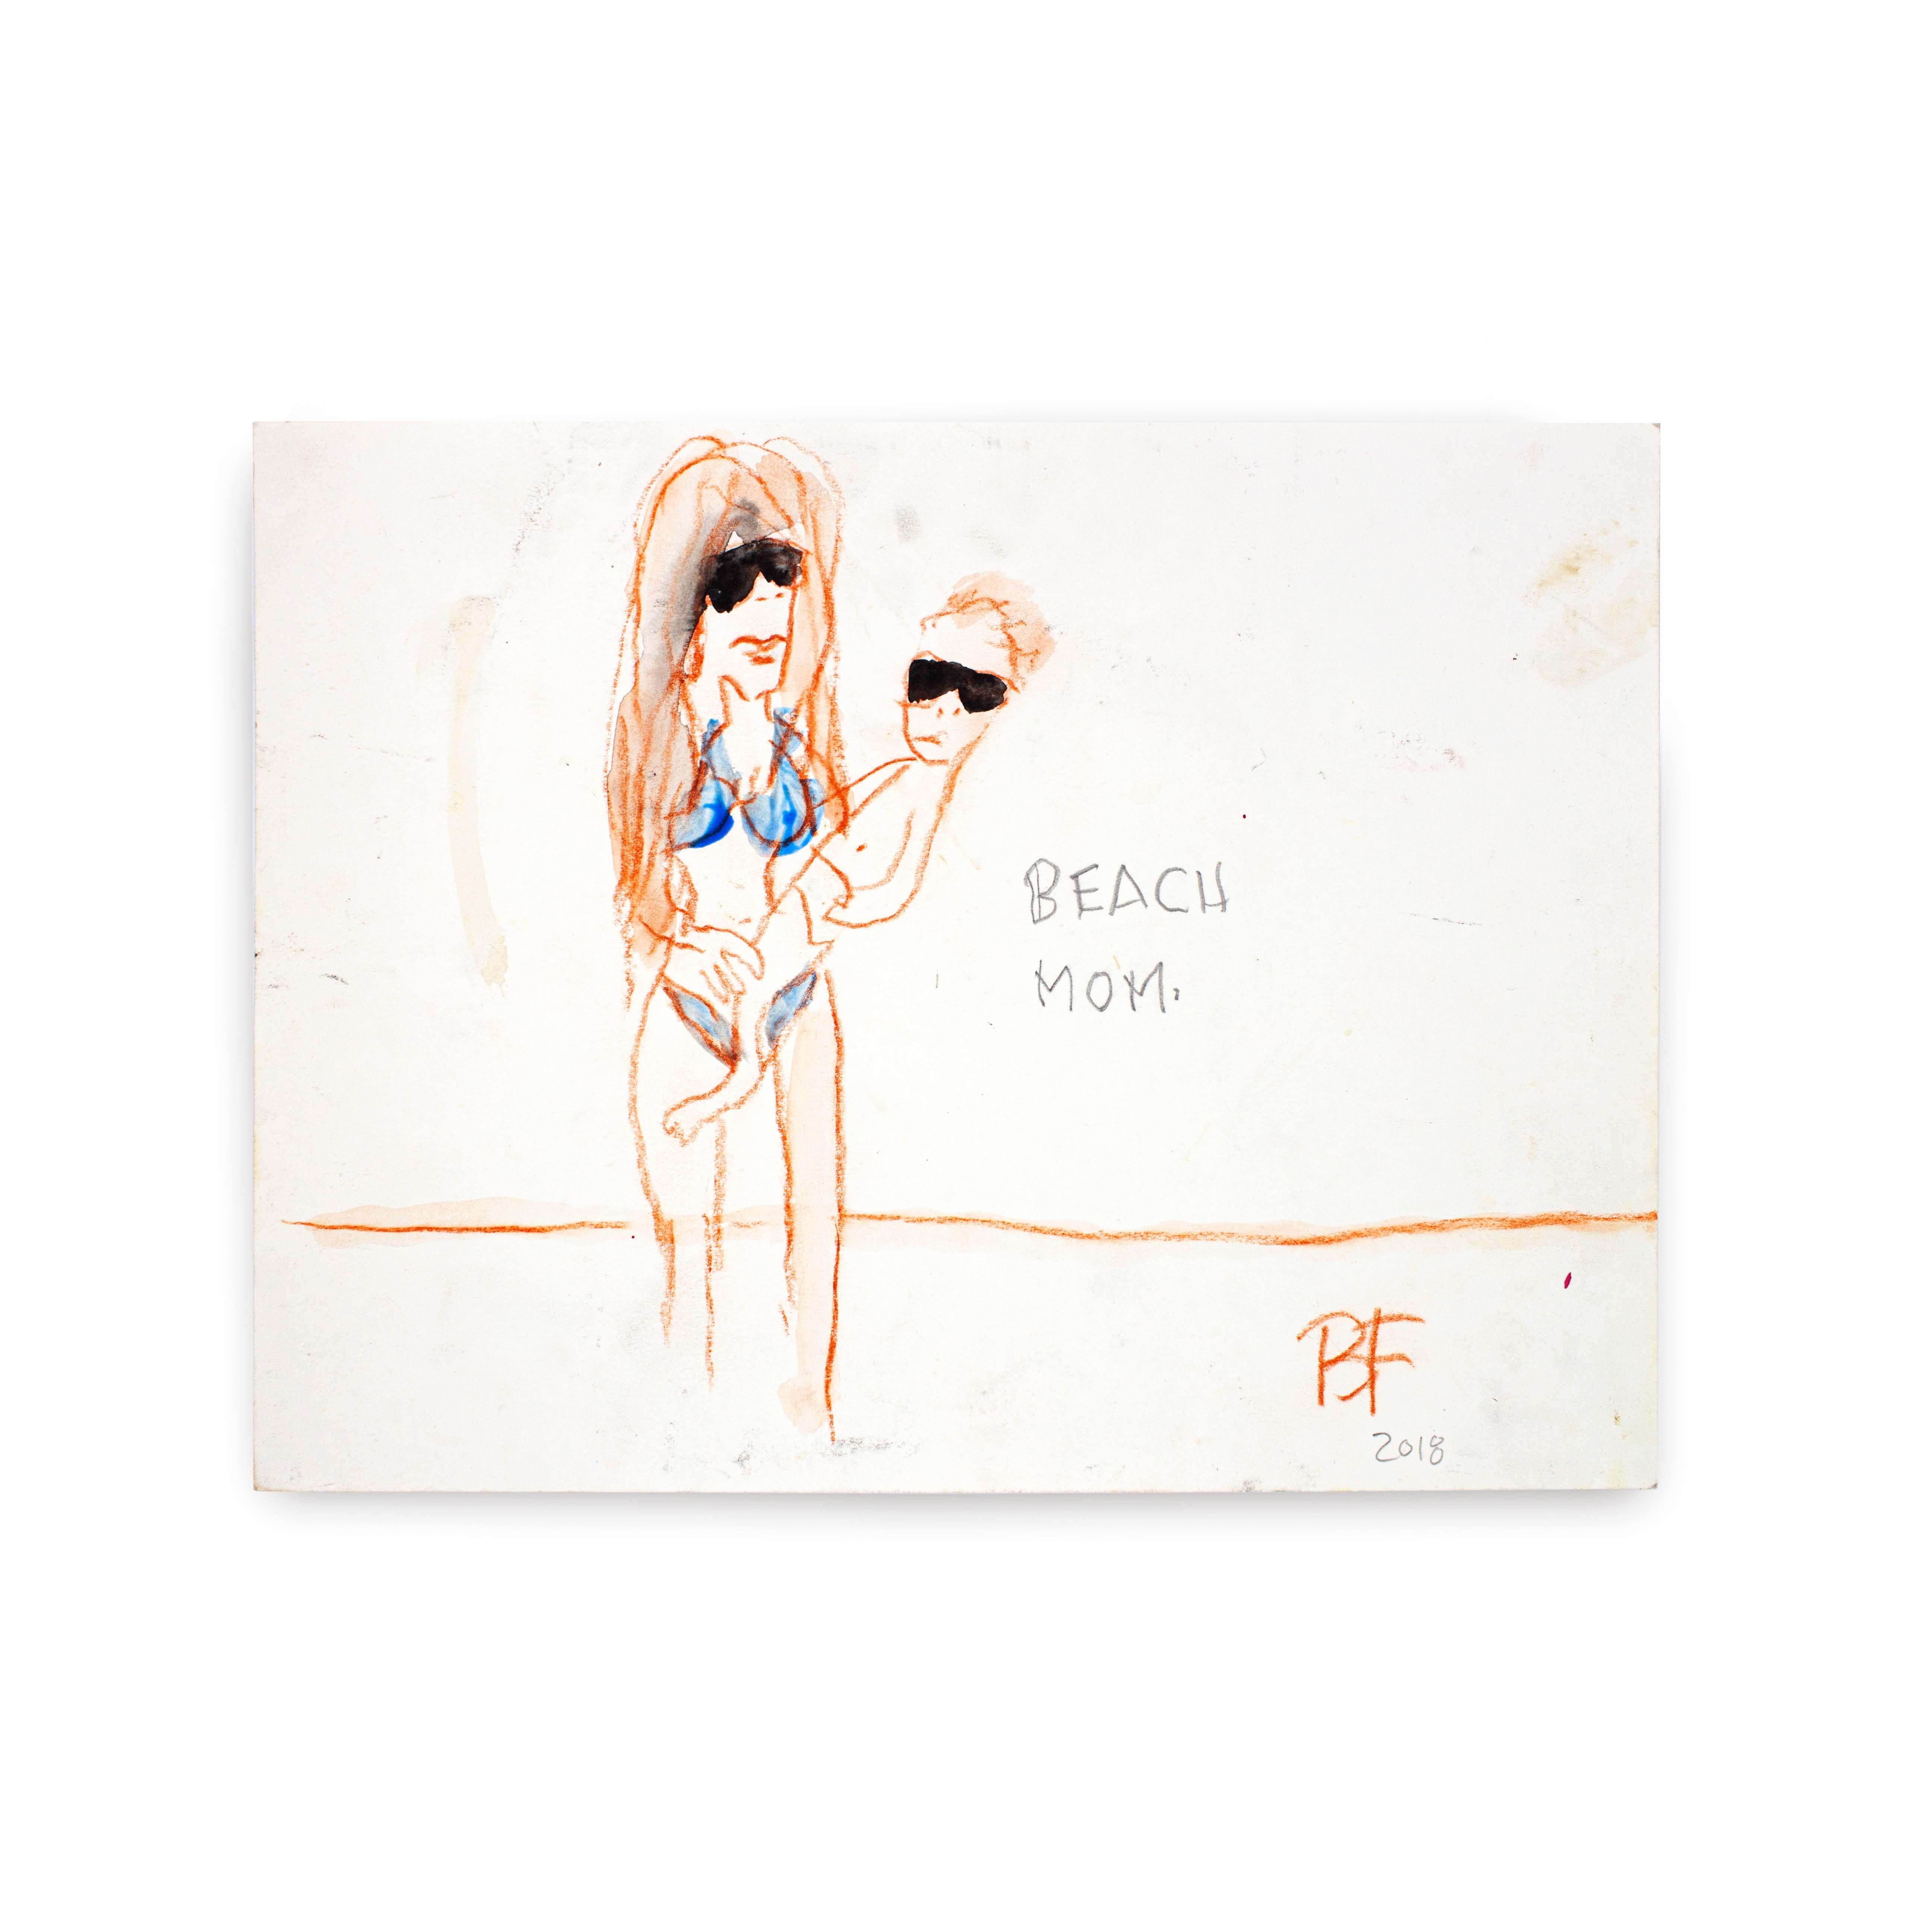 "Beach Mom" Painting Mixed Media on Paper by Brad Fisher, REP by Tuleste Factory